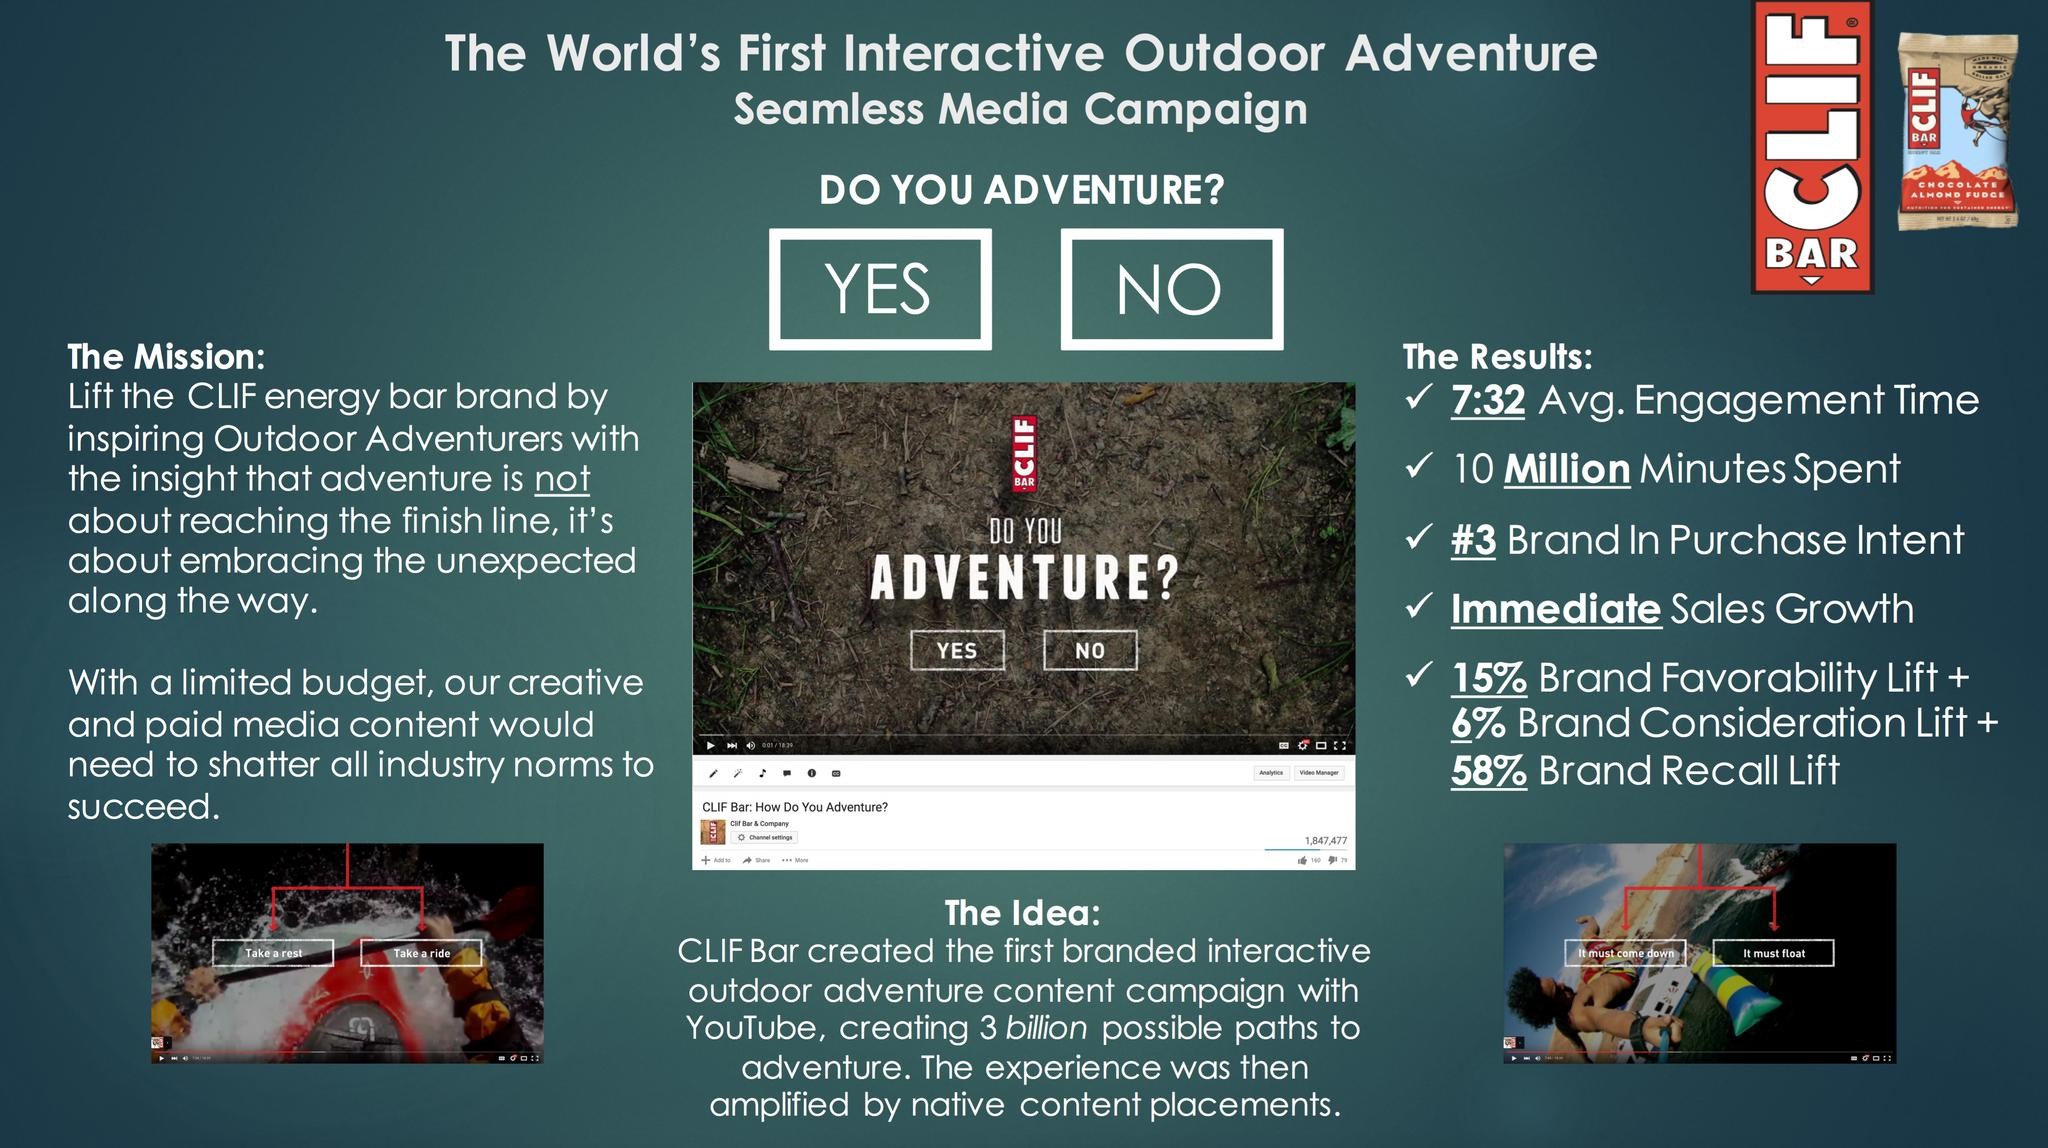 How Do YOU Adventure? The World's First Seamless Interactive Outdoor Adventure V